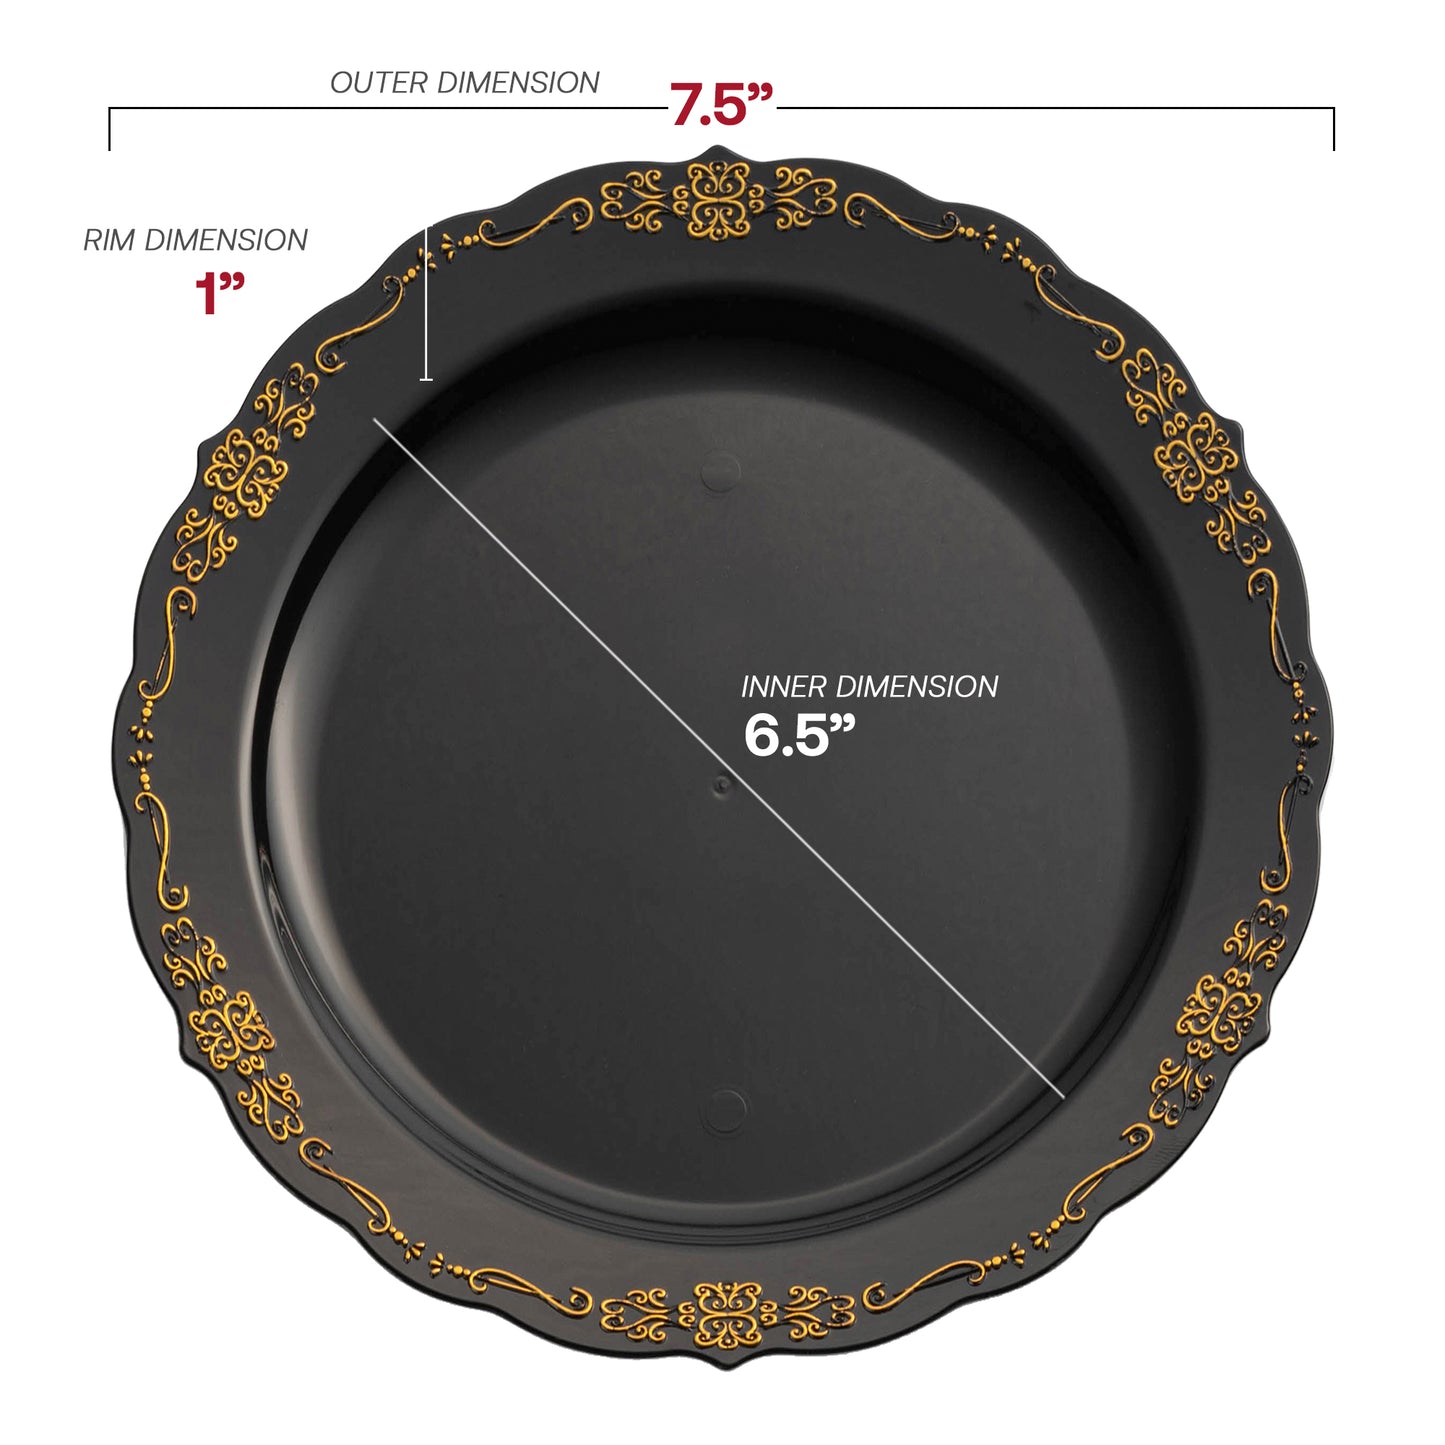 Black with Gold Vintage Rim Round Disposable Plastic Appetizer/Salad Plates (7.5") Dimension | The Kaya Collection